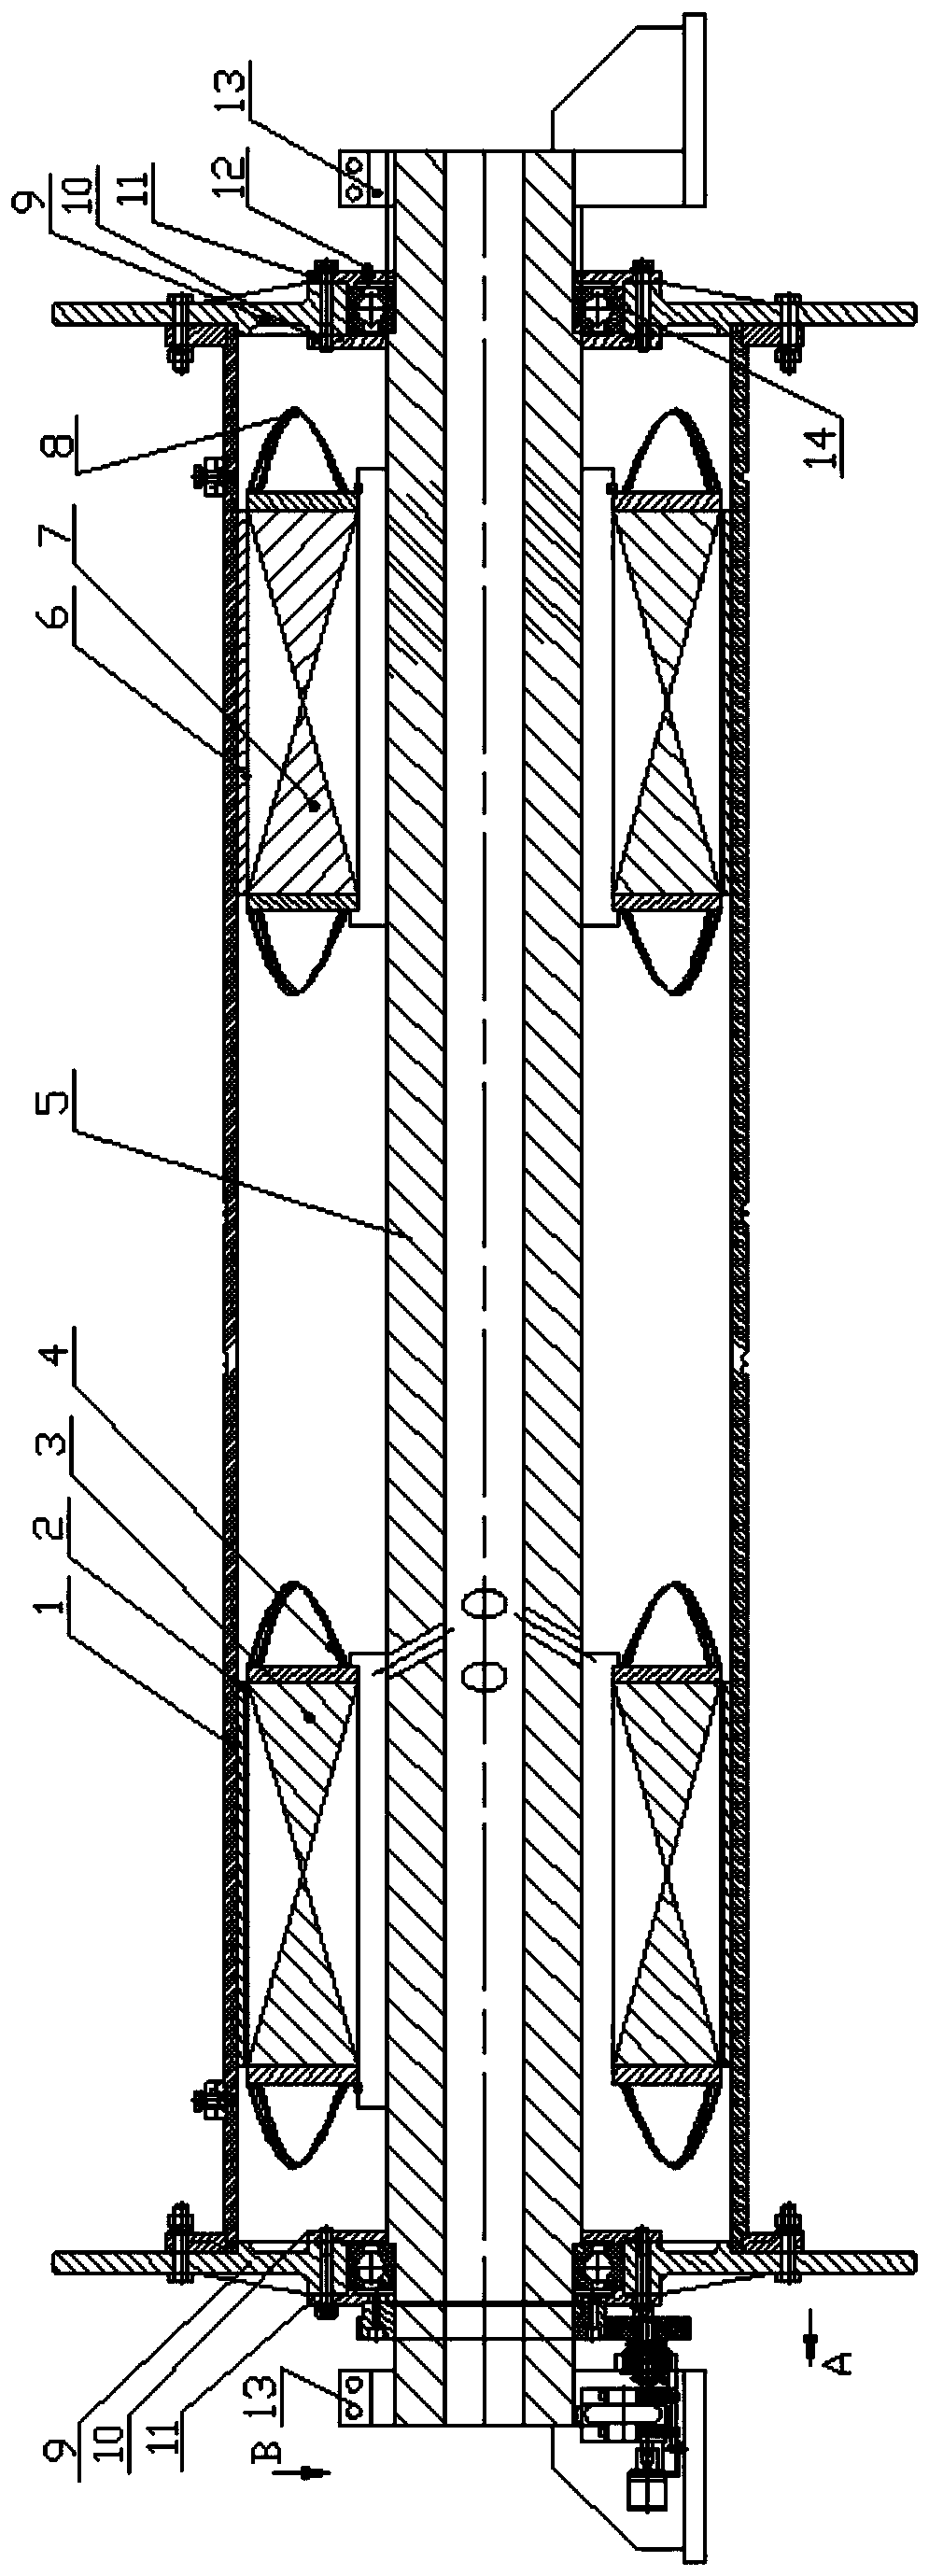 A motor reel integrated lifting device structure